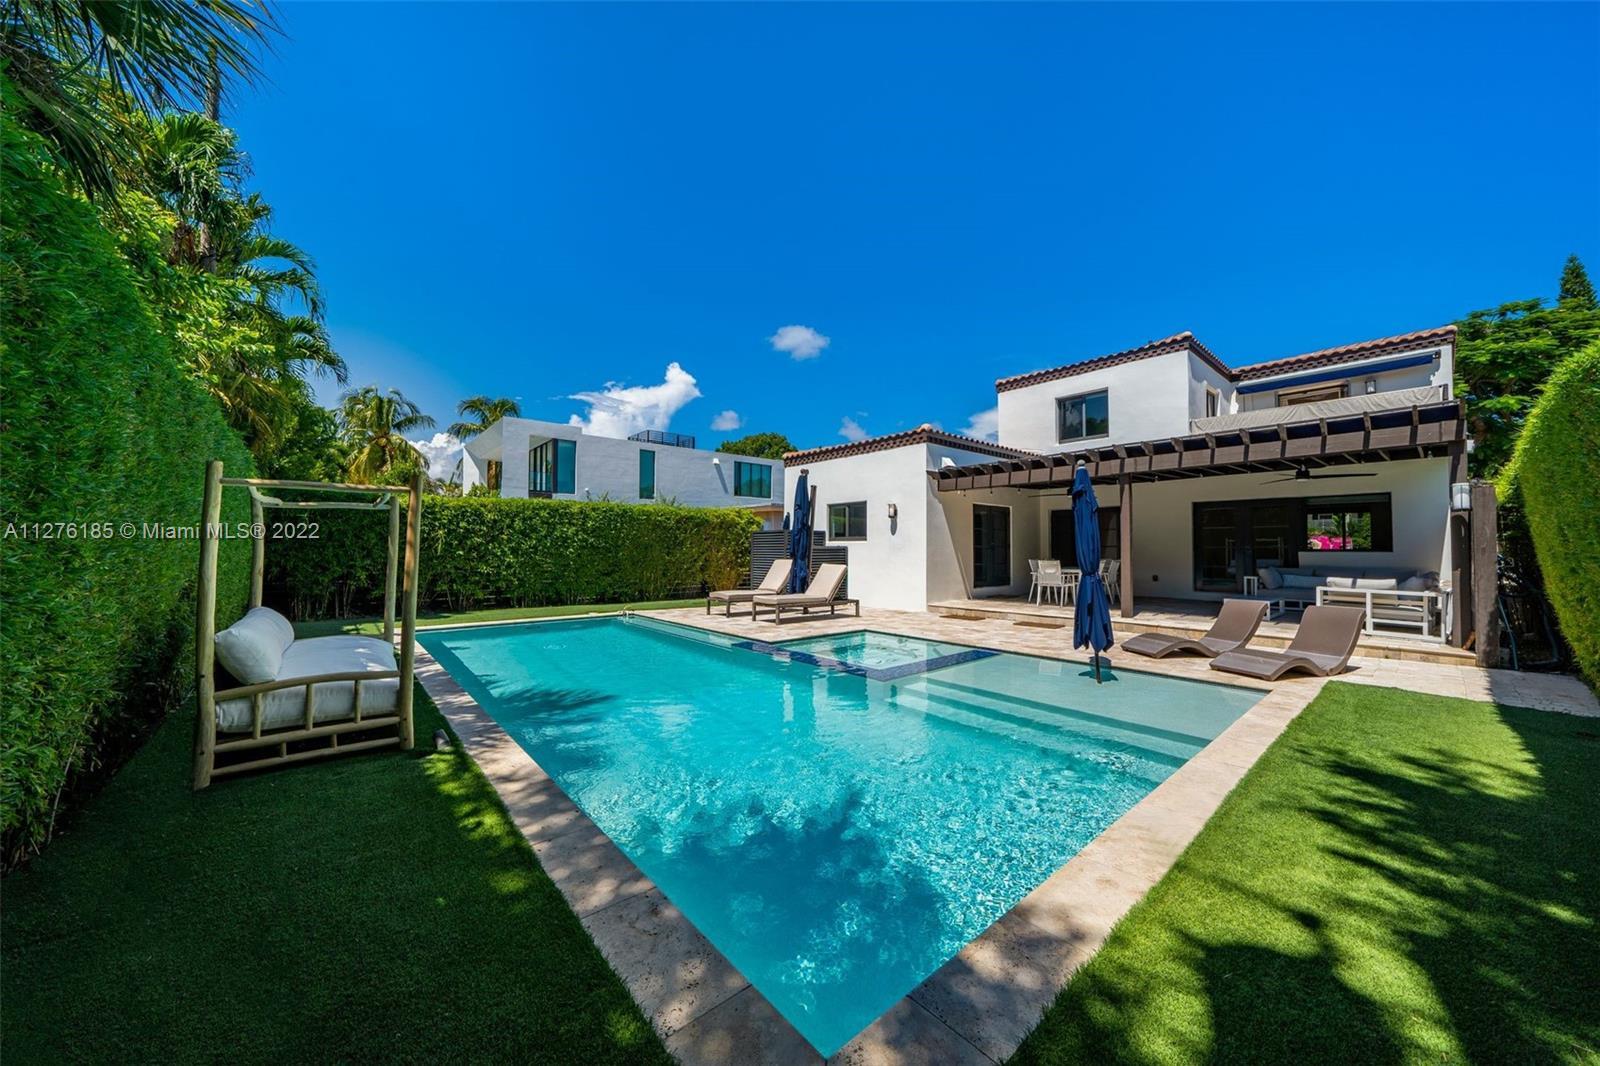 Distinct and charming Miami Beach home located in the highly desirable and family-friendly Lakeview 